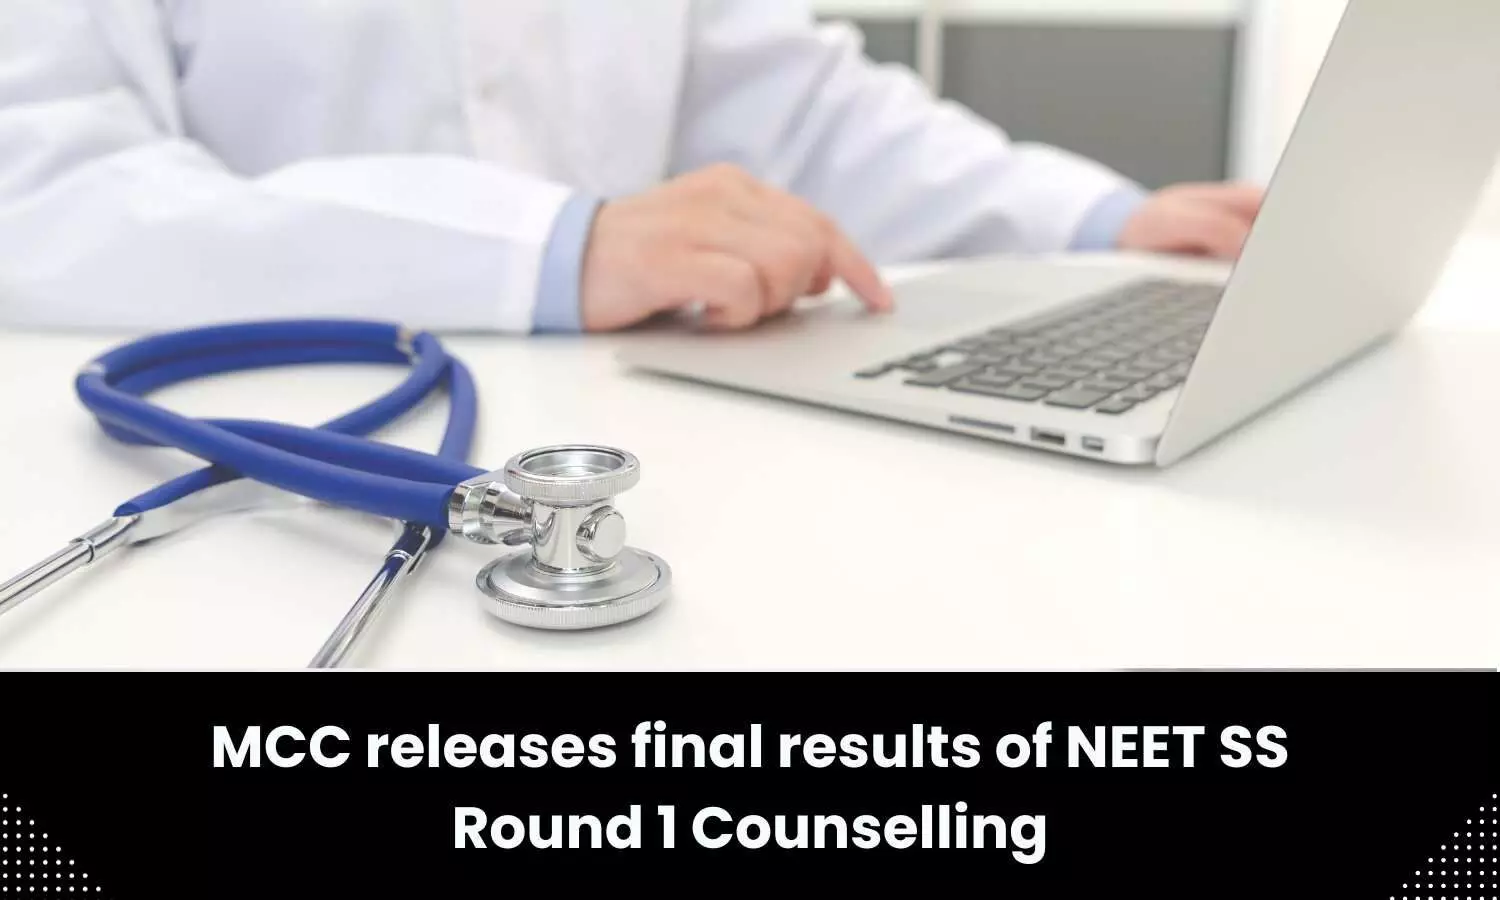 Final results of NEET SS Round 1 Counselling released by MCC